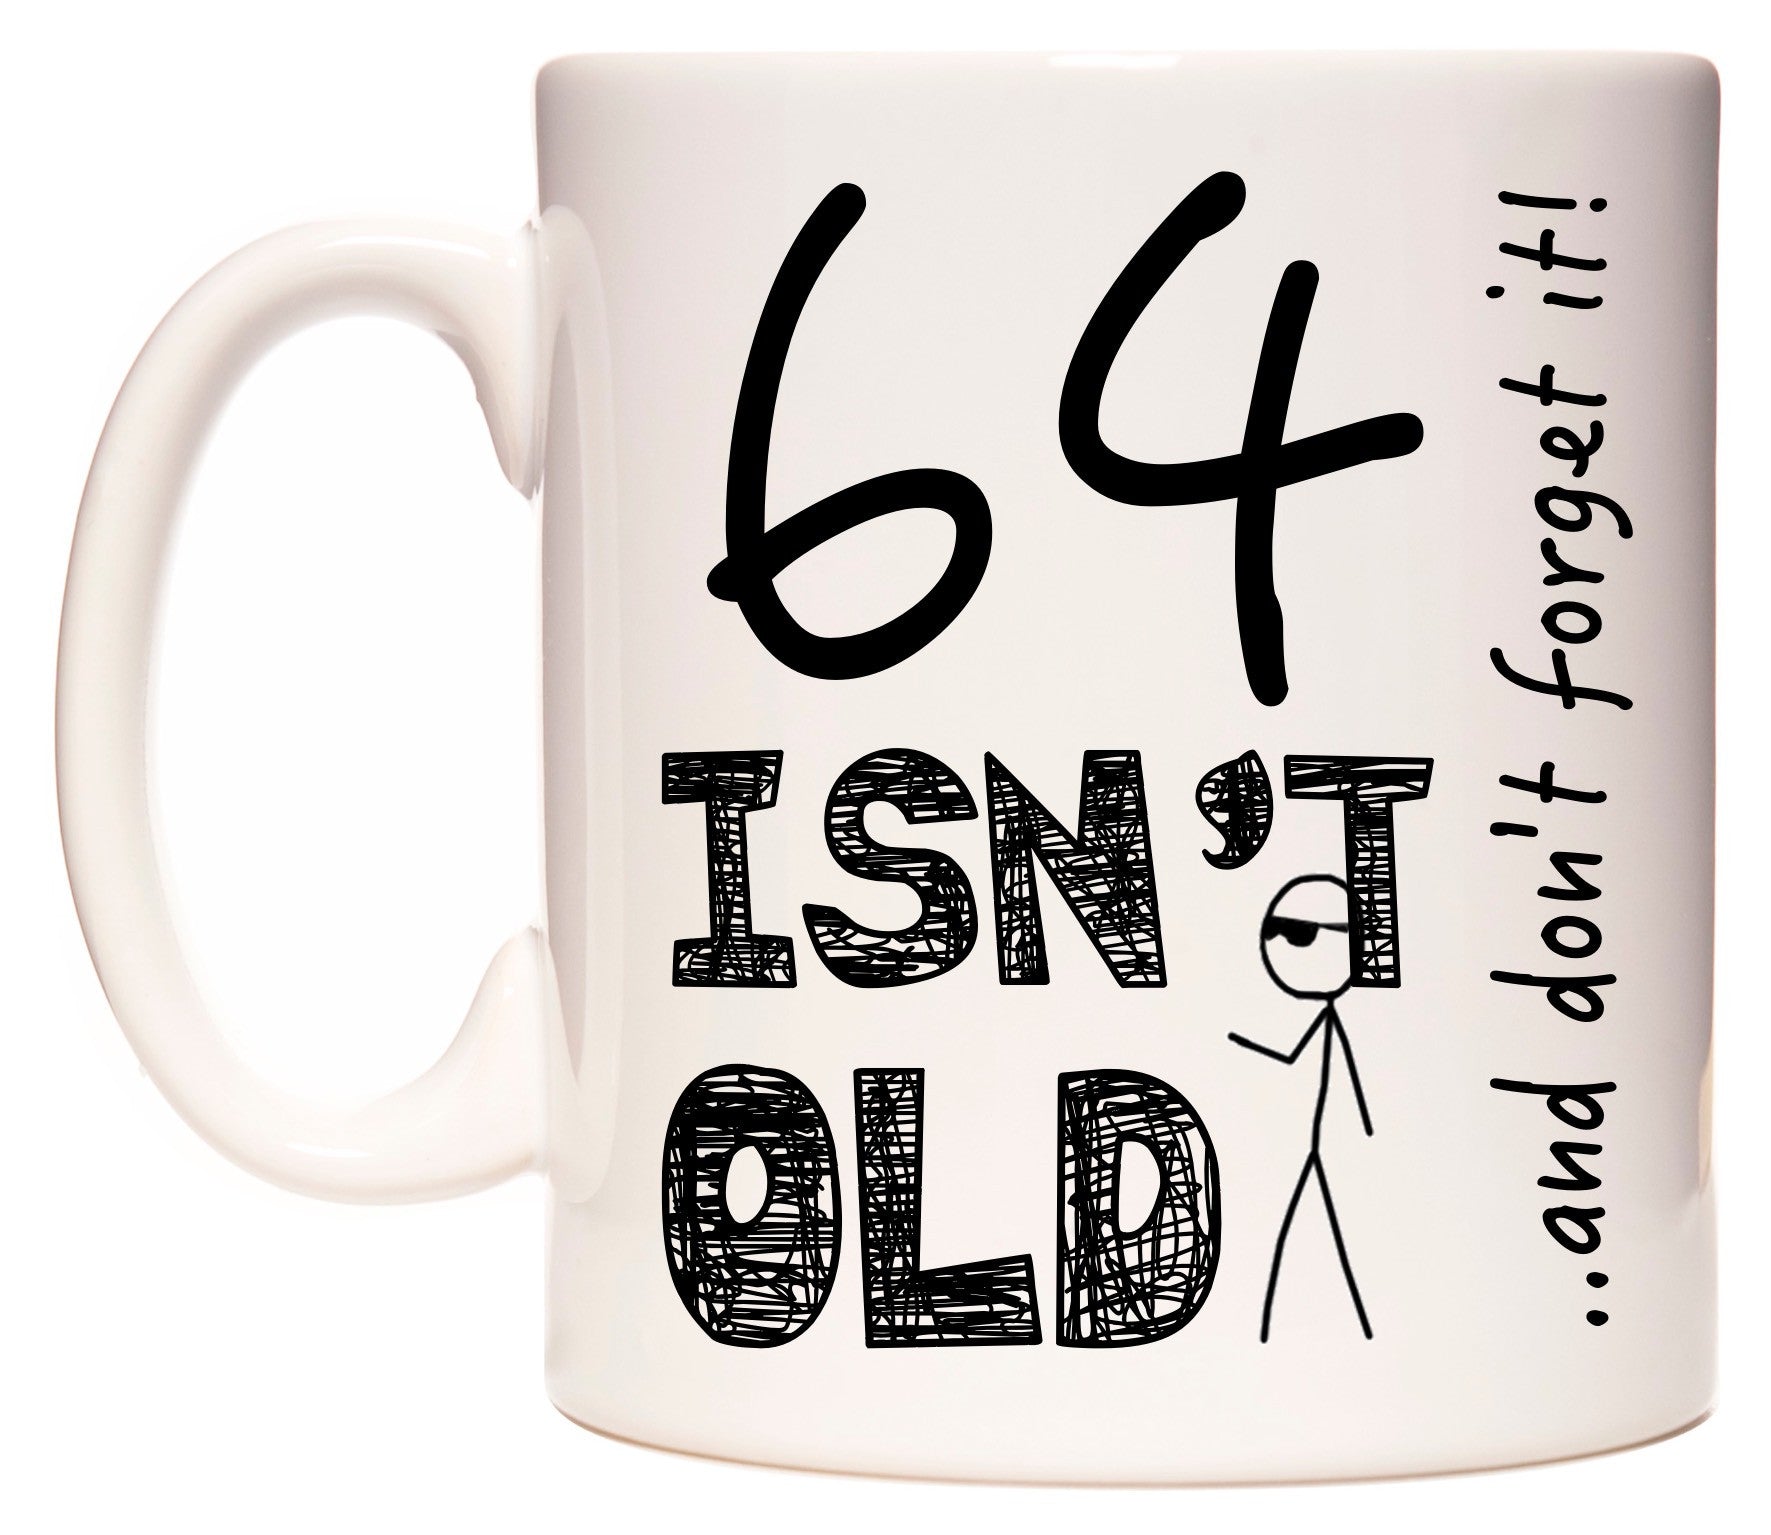 This mug features 64 Isn't Old